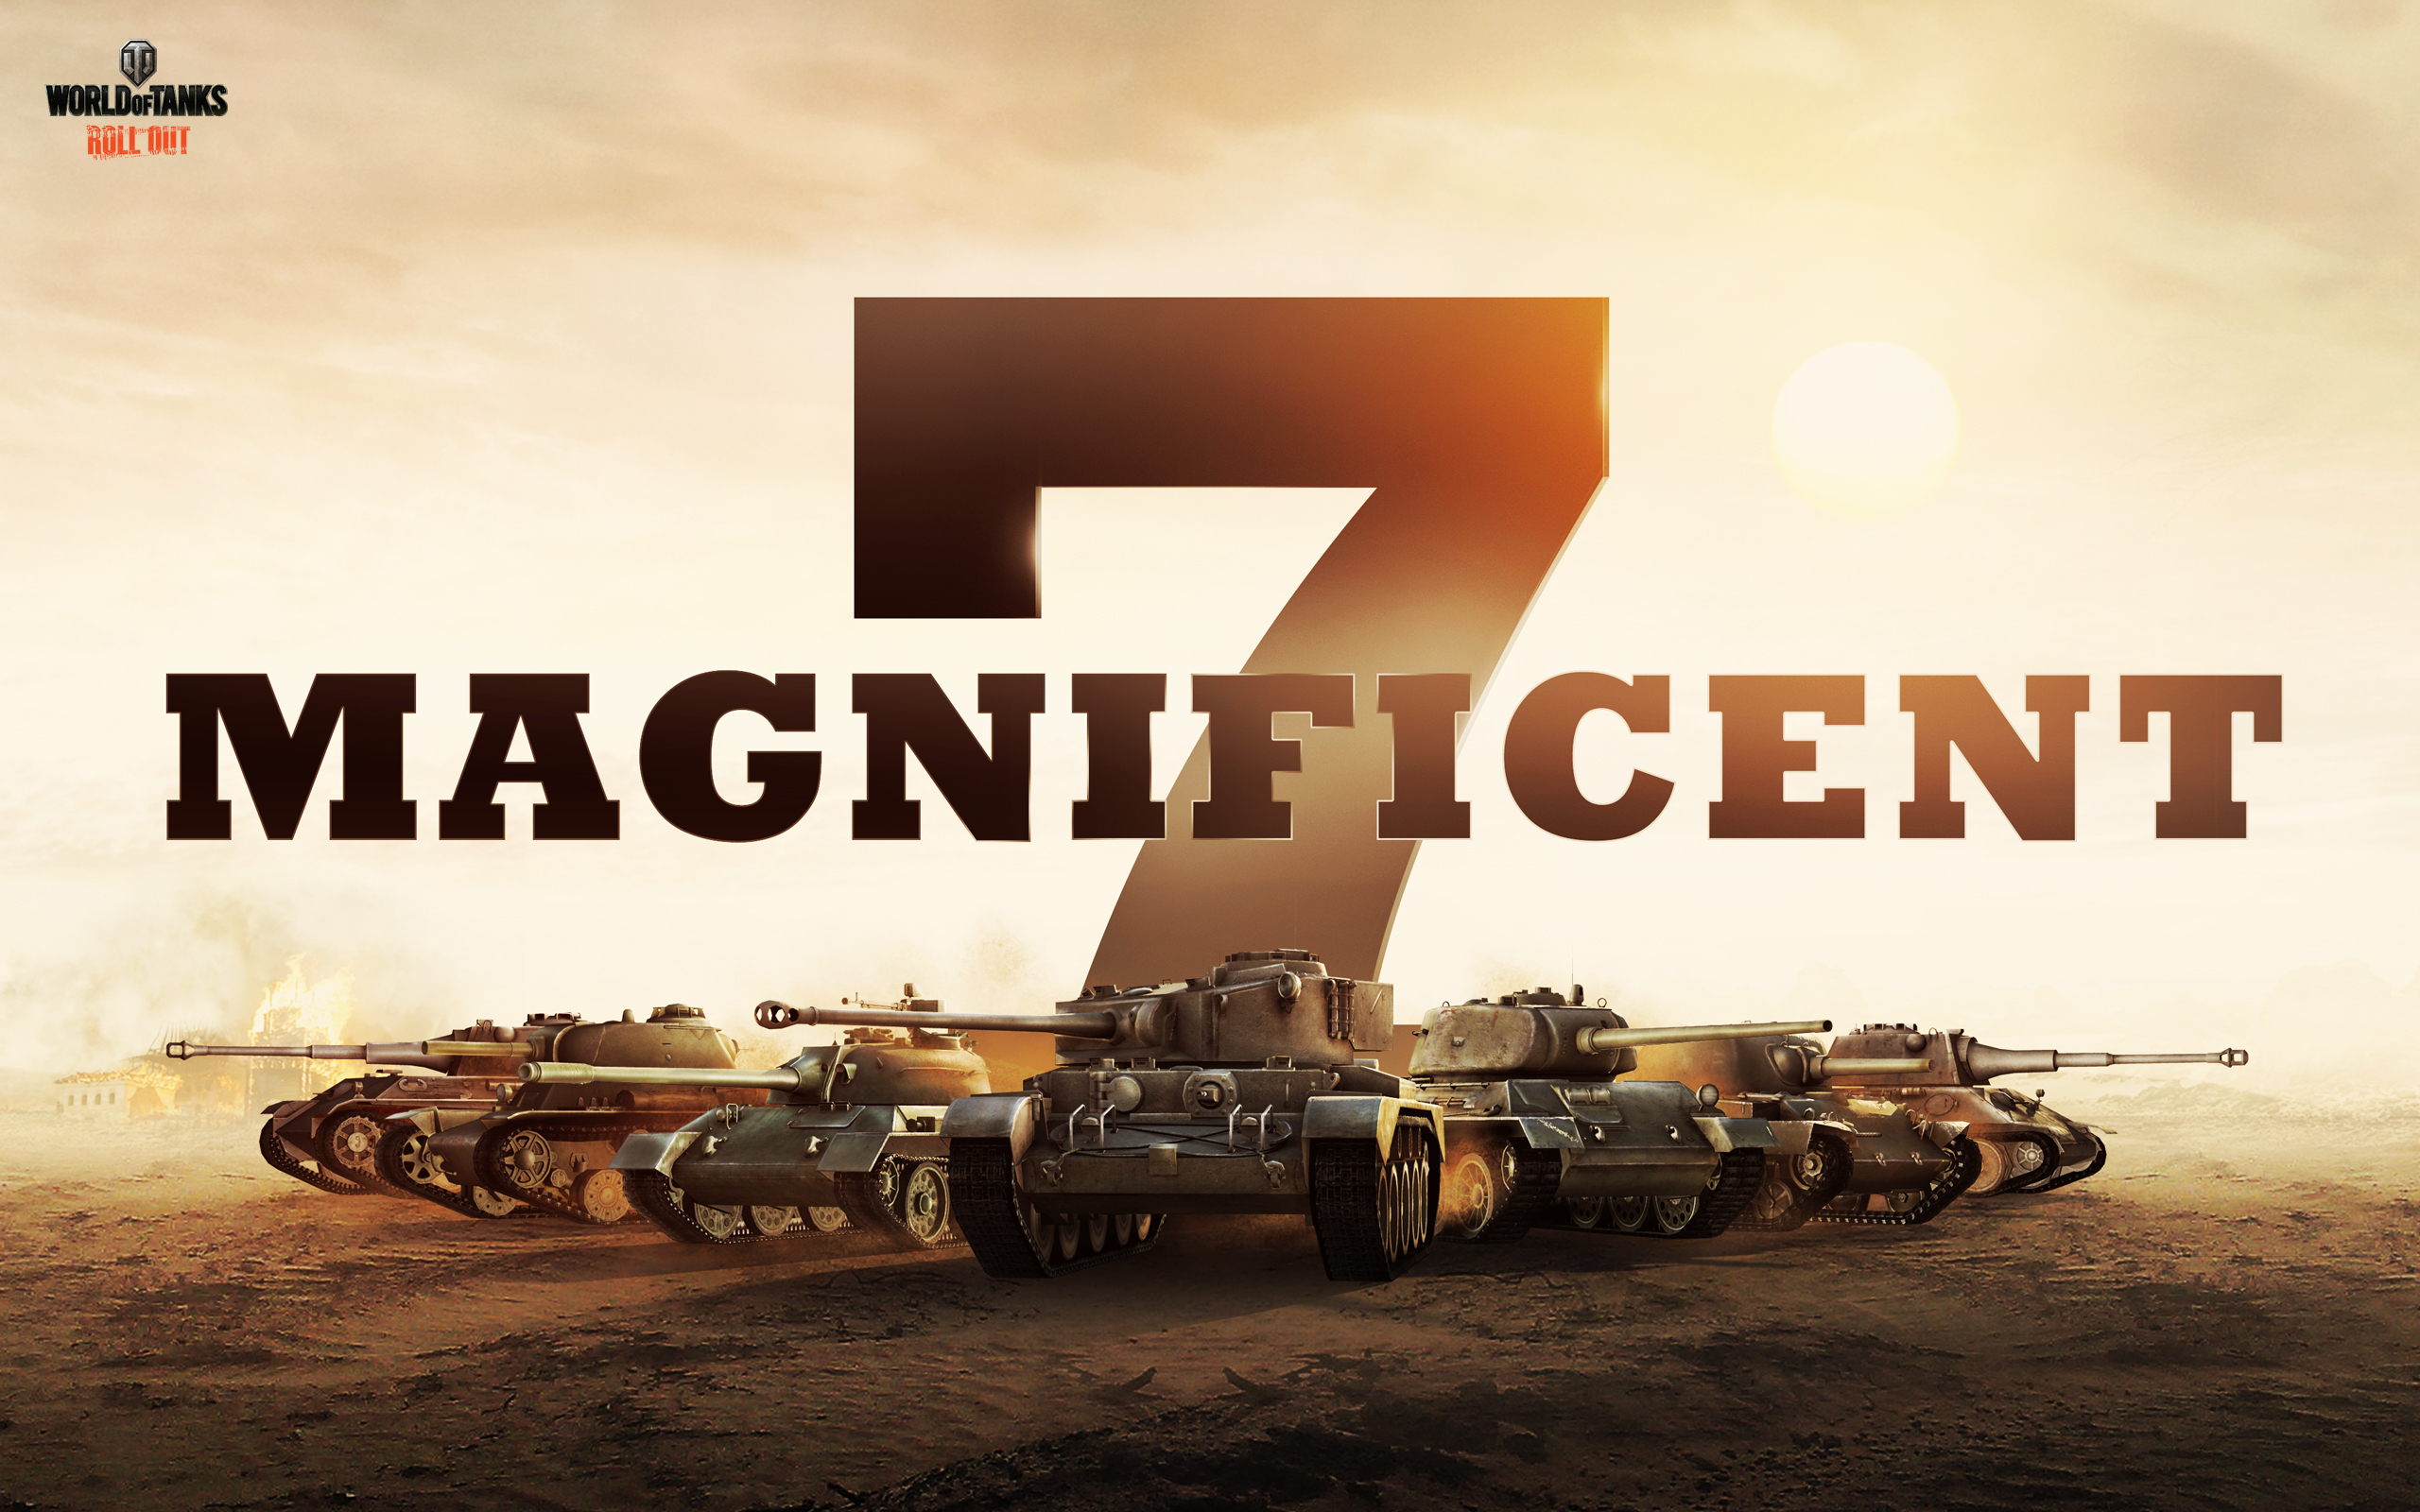 Magnificent - World Of Tank Roll Out , HD Wallpaper & Backgrounds